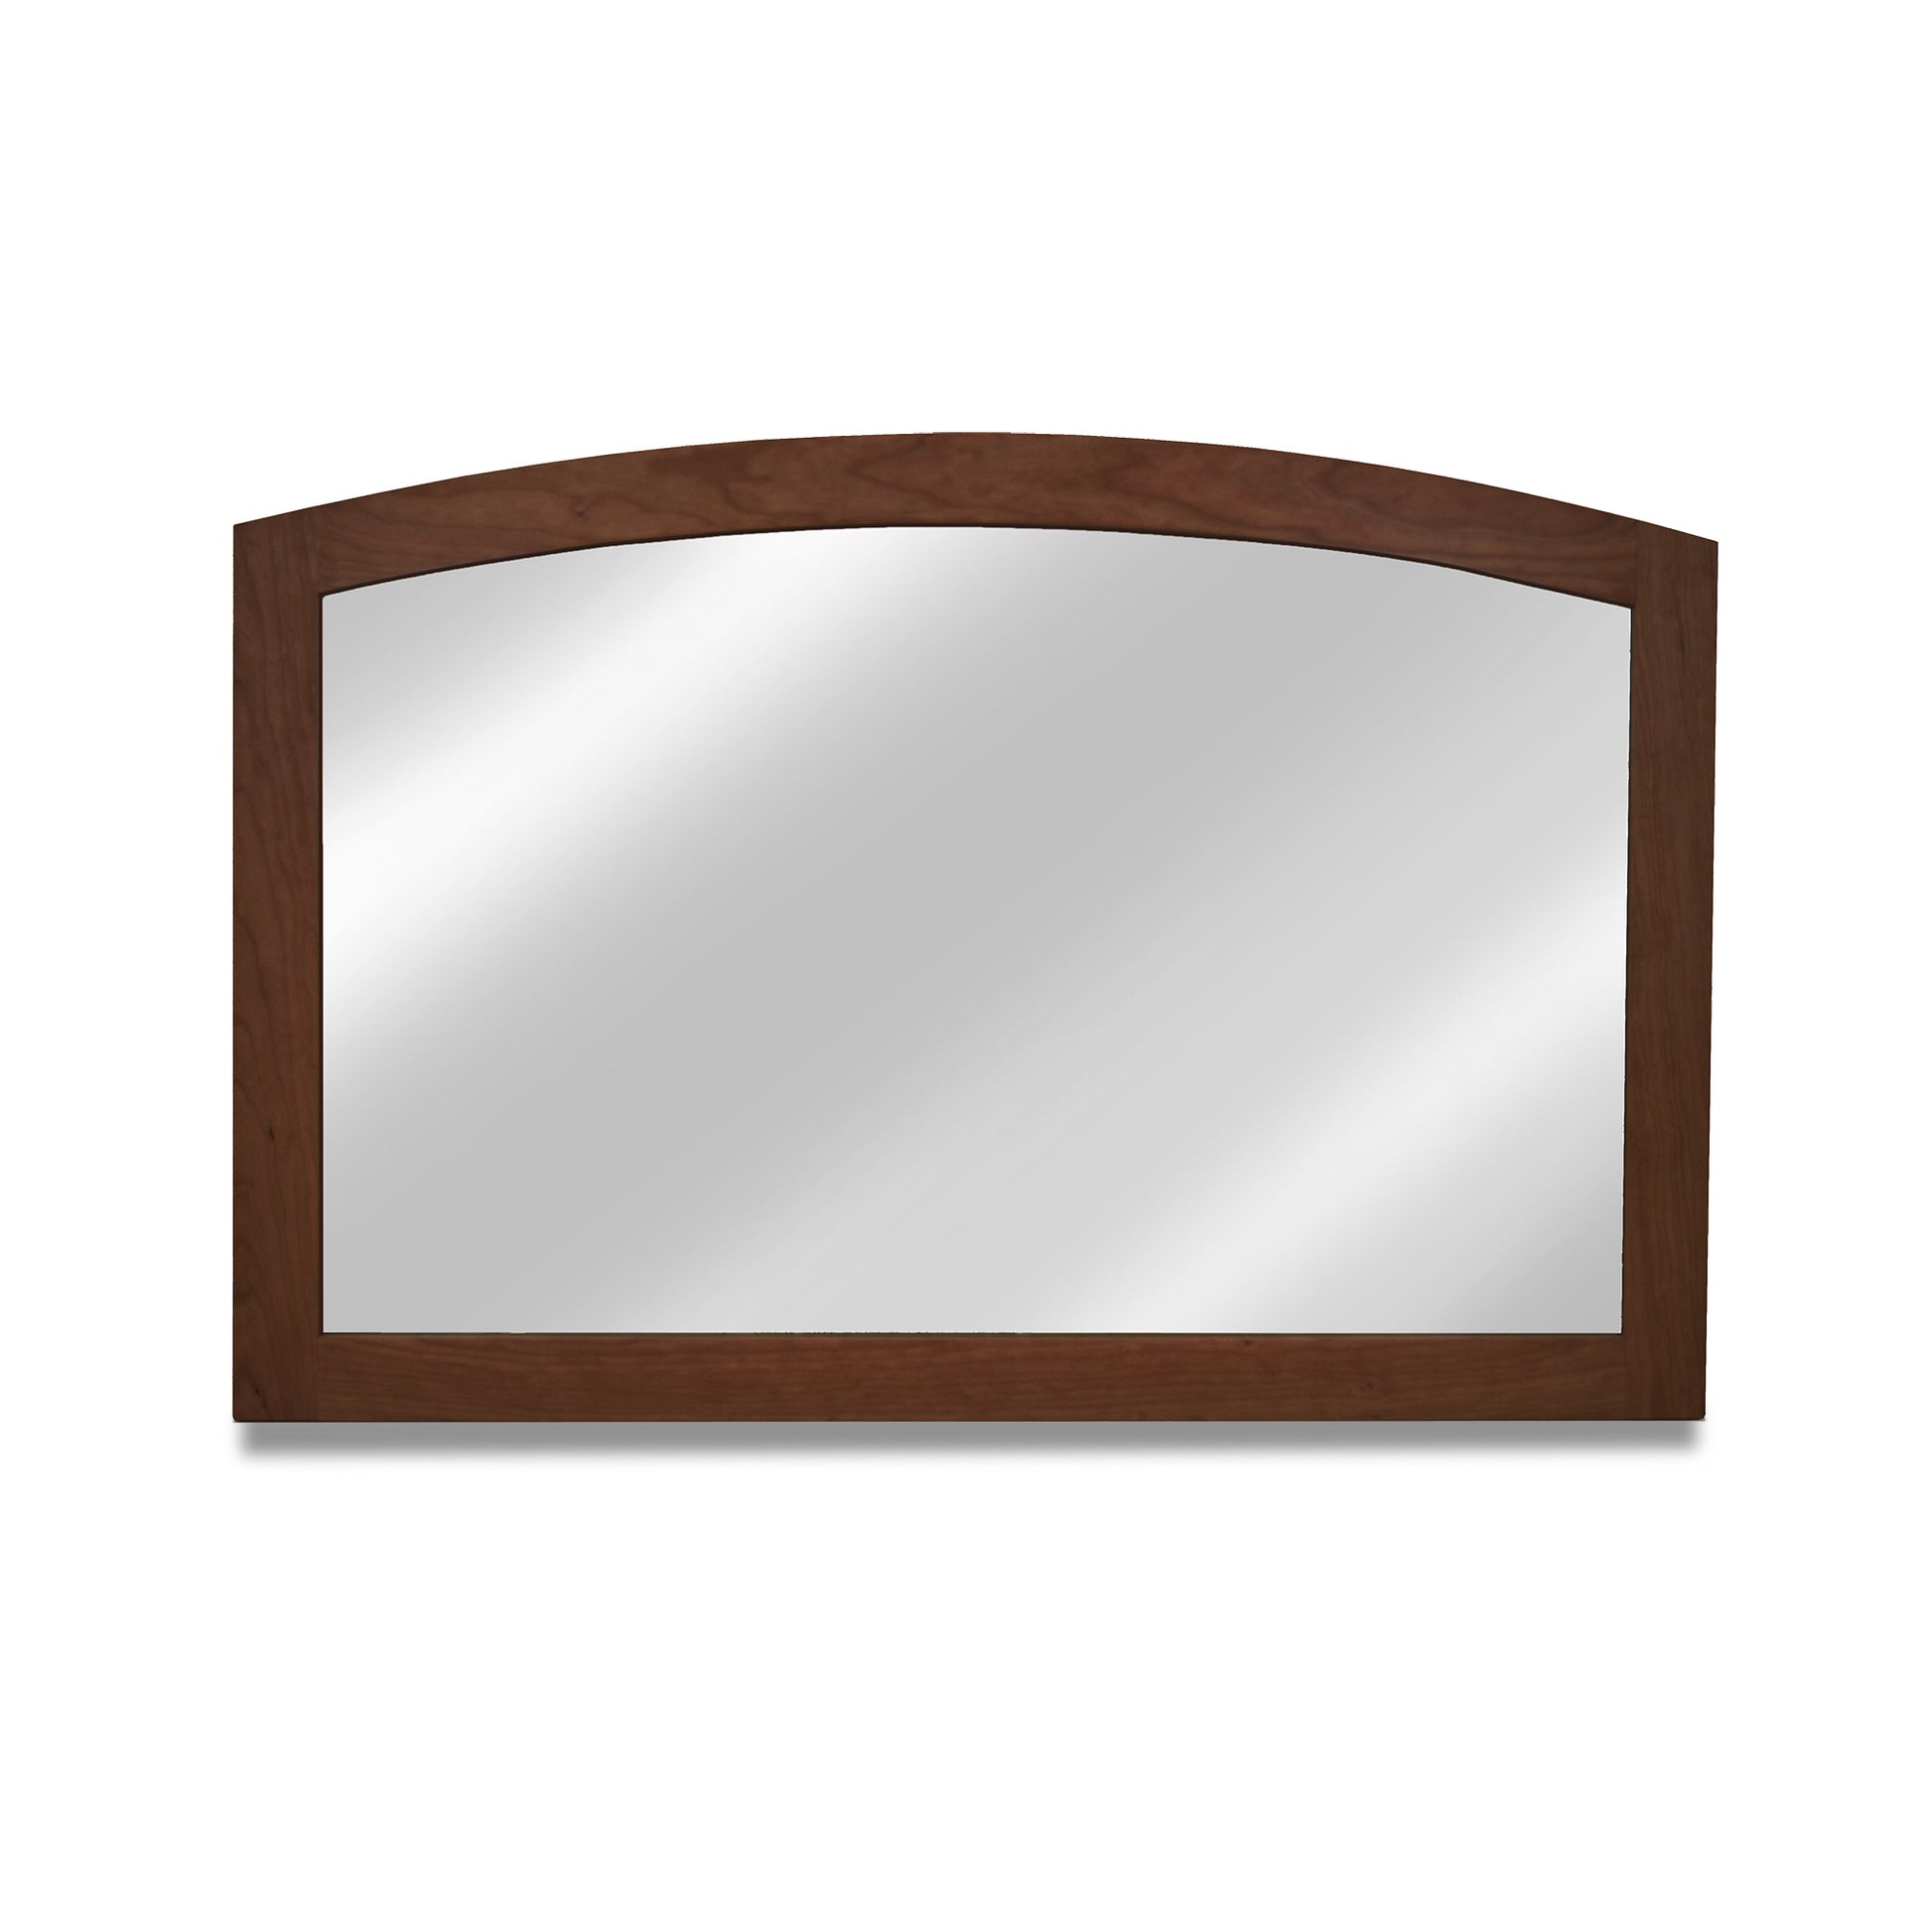 A rectangular Maple Corner Woodworks American Shaker Arched Mirror with a sustainably harvested solid hardwood frame, isolated on a white background.